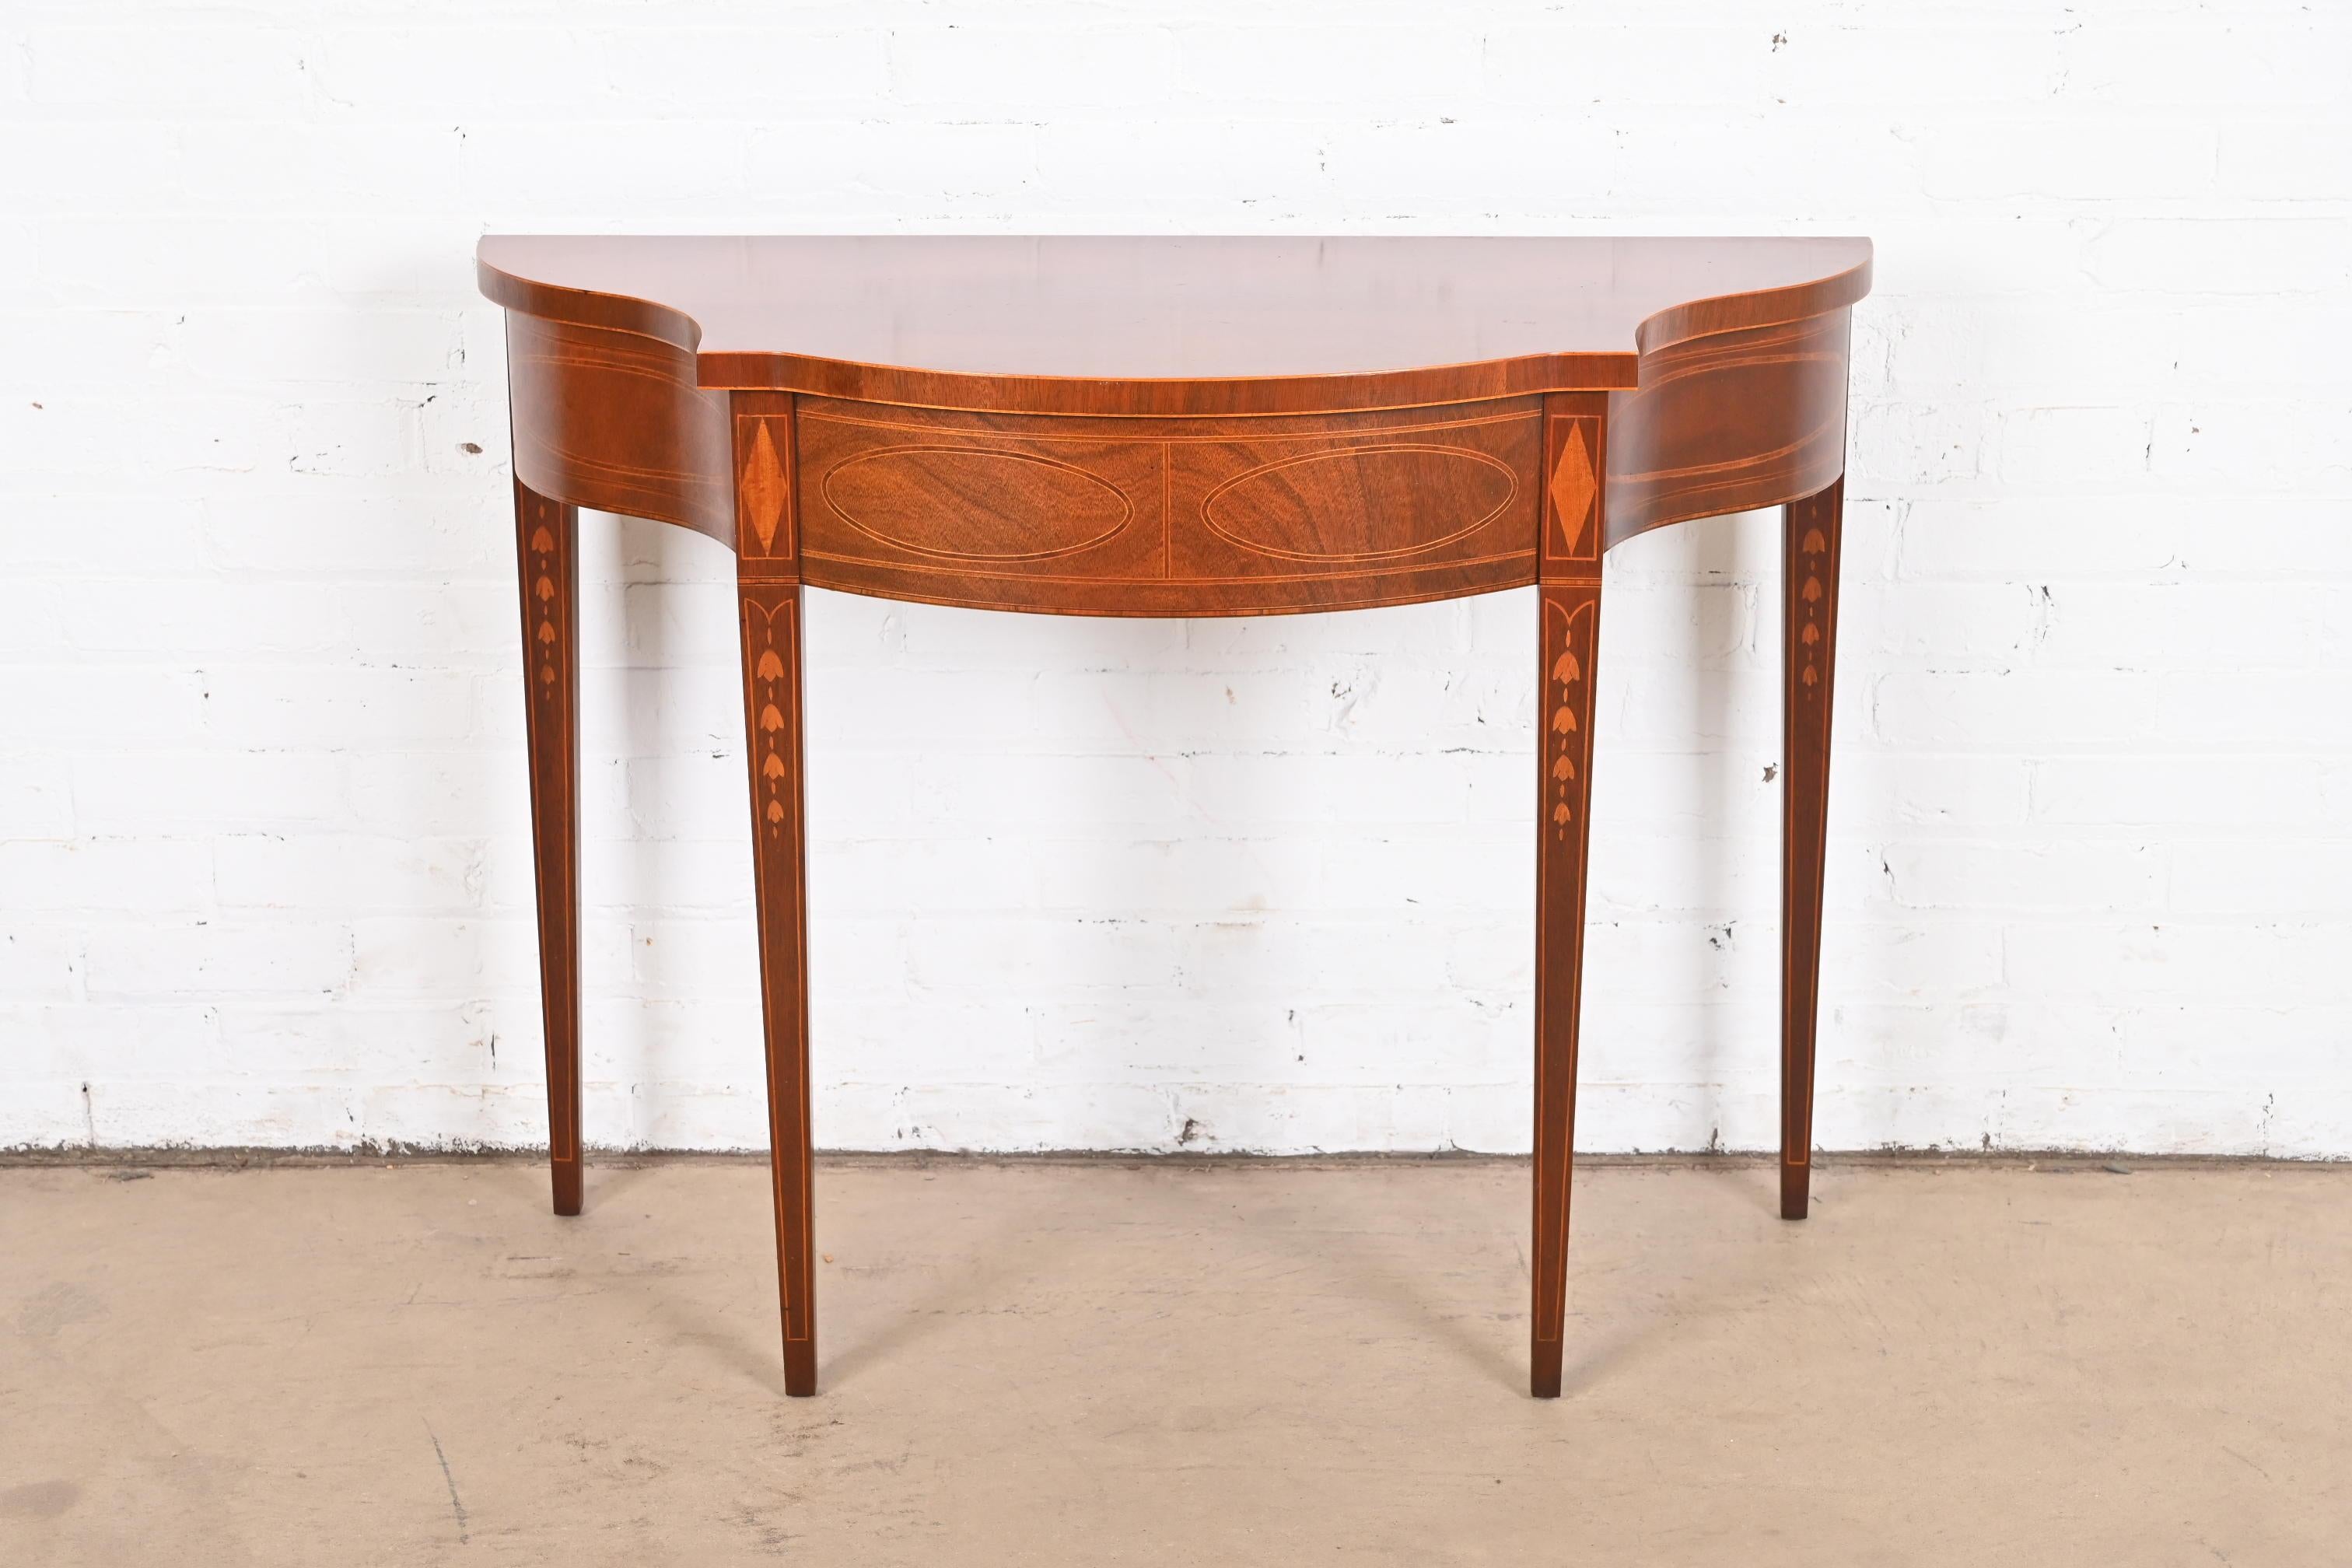 A gorgeous Federal or Hepplewhite style console table, sofa table, or entry table

By Baker Furniture, 